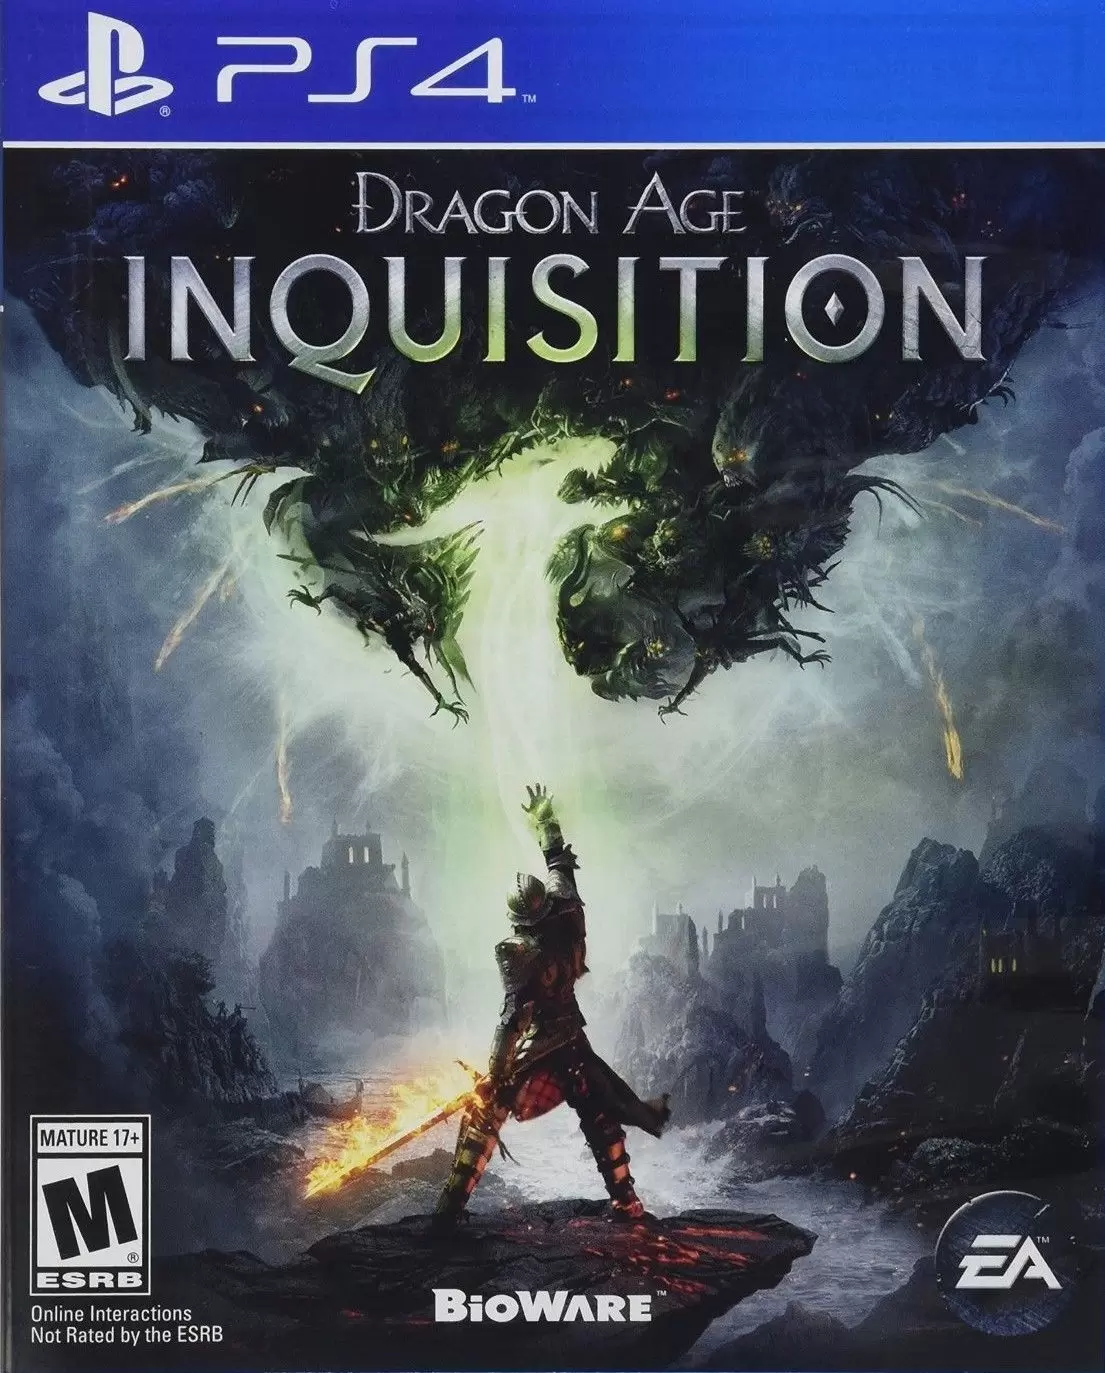 PS4 Games - Dragon Age: Inquisition